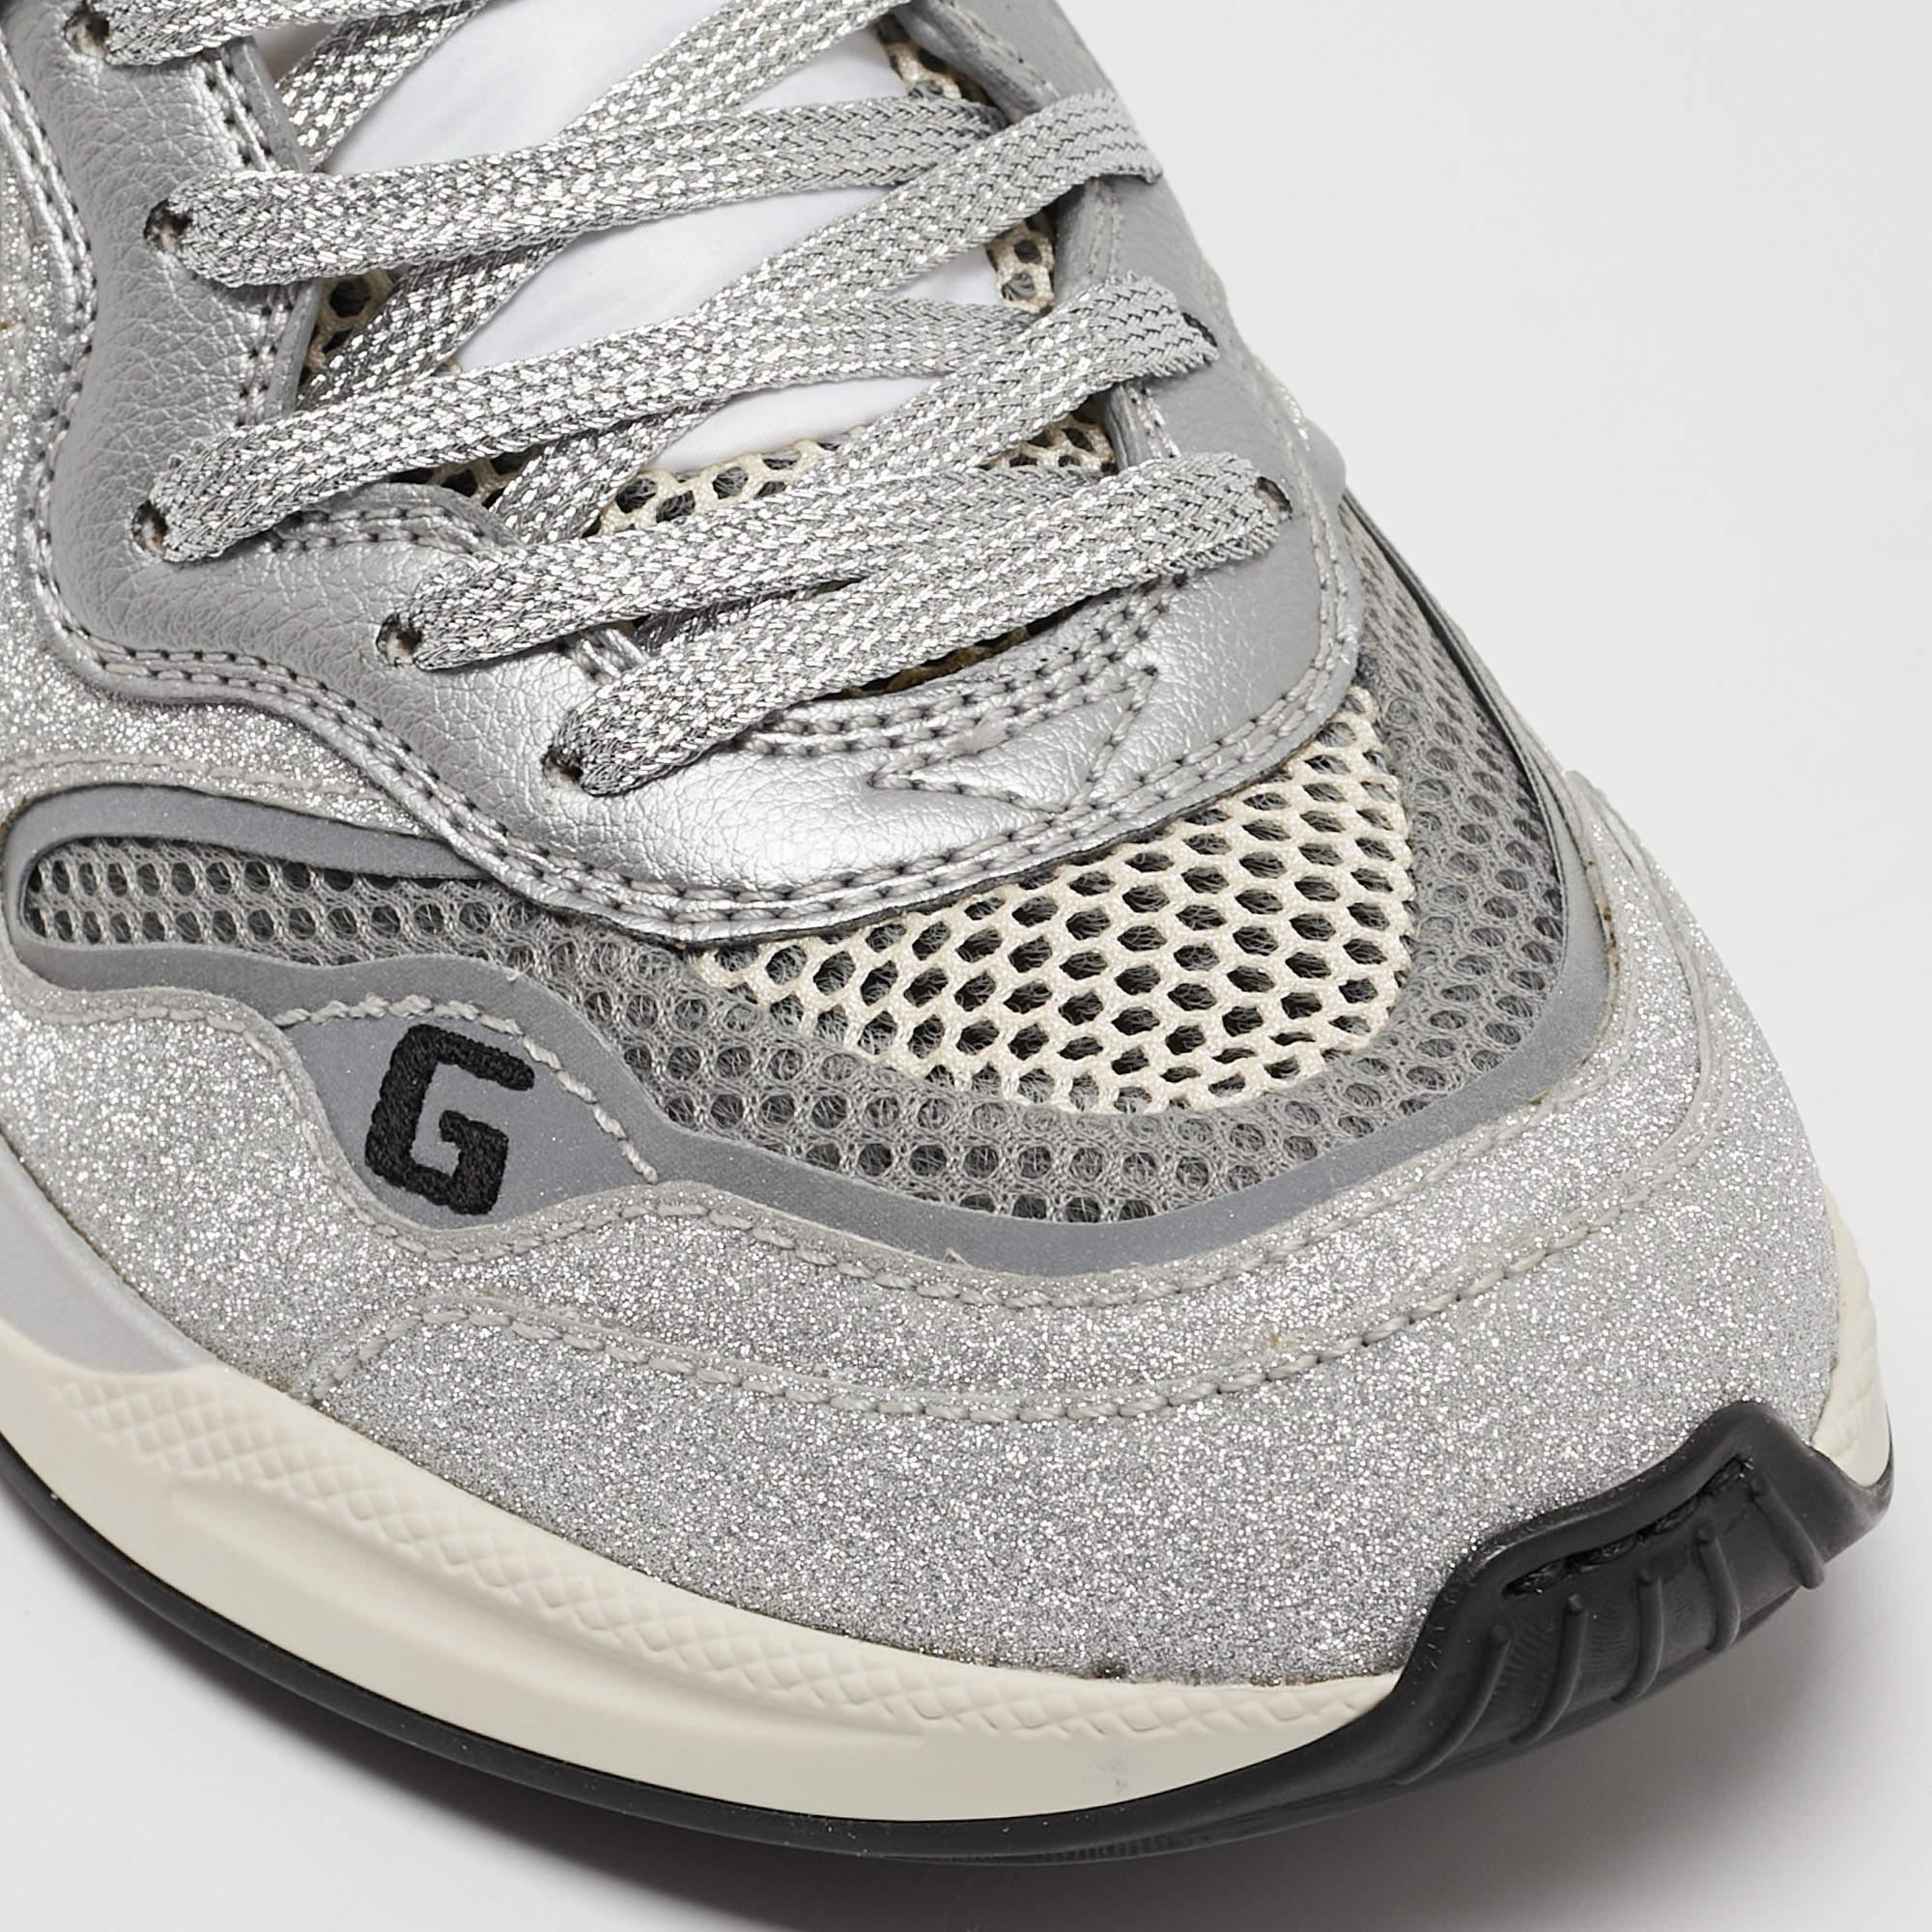 Gucci Silver/Grey Glitter and Mesh Ultrapace Sneakers Size 36.5 1